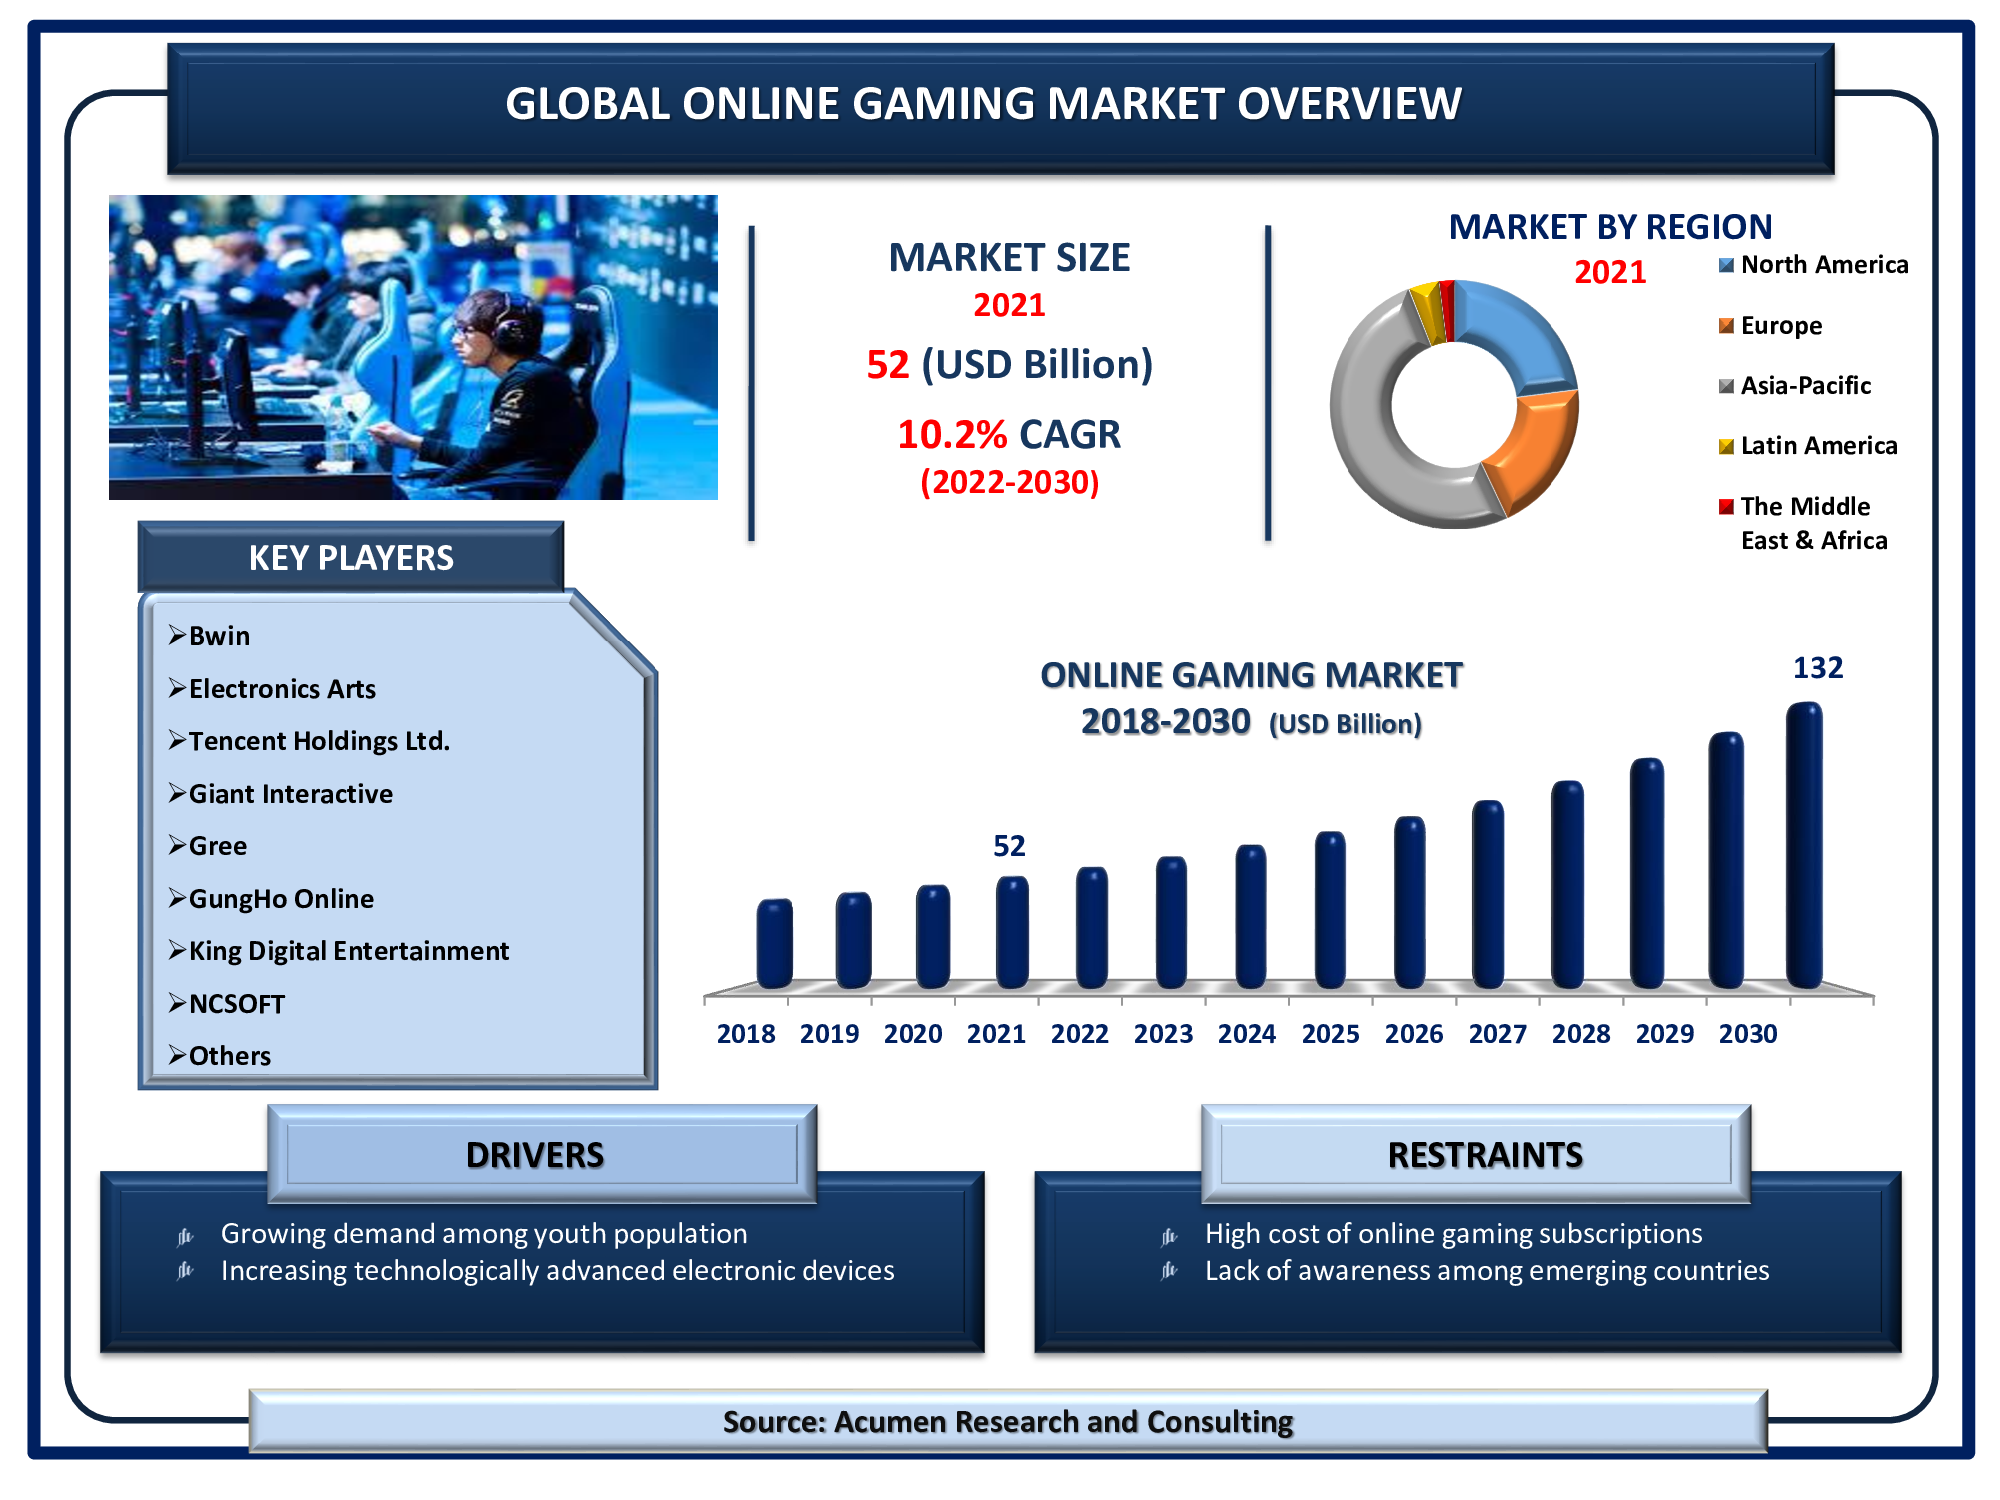 Browser Games Market Latest Research Report with Growth Estimate till 2030